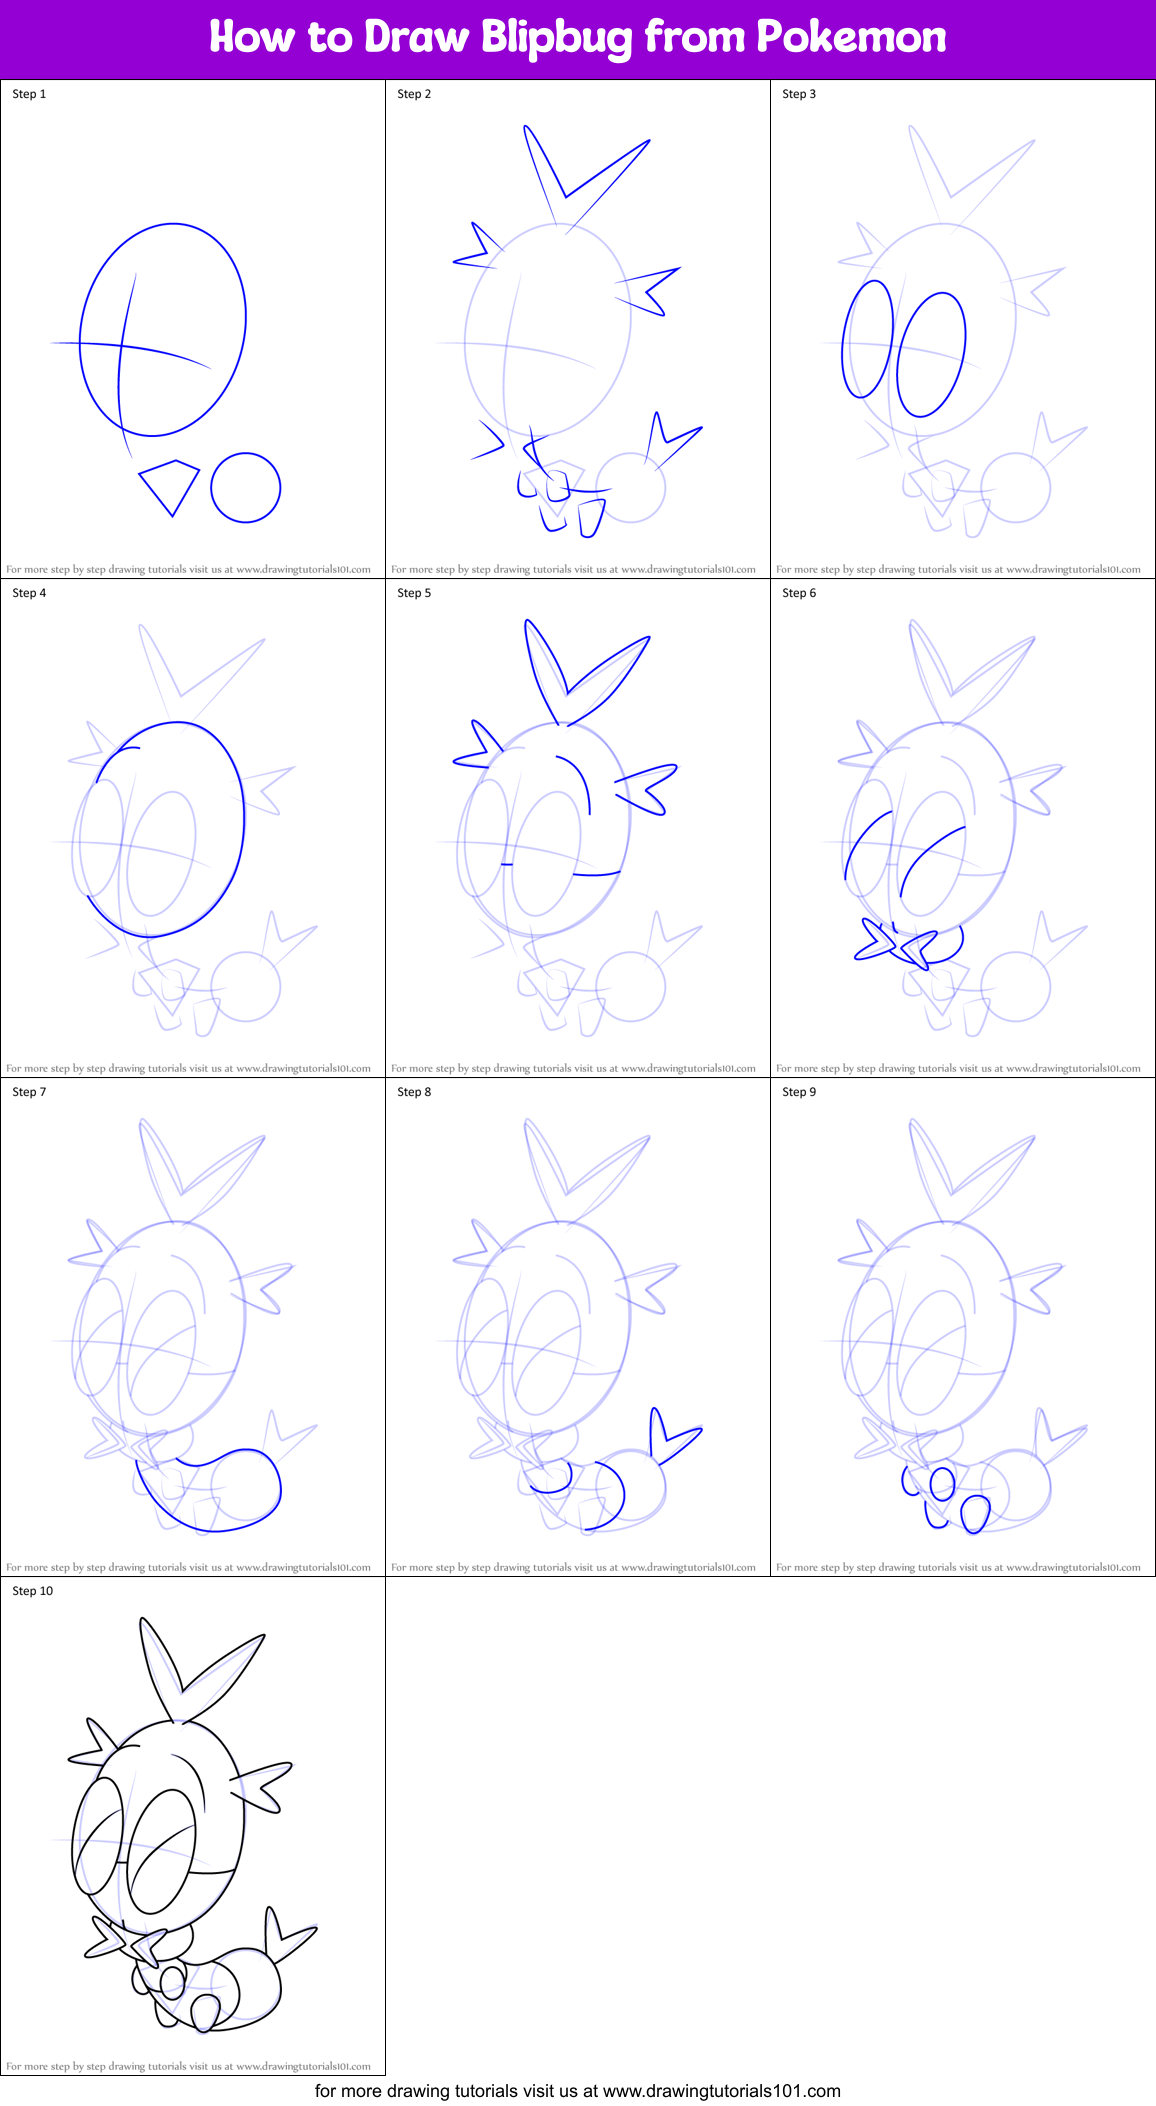 How to Draw Blipbug from Pokemon printable step by step drawing sheet